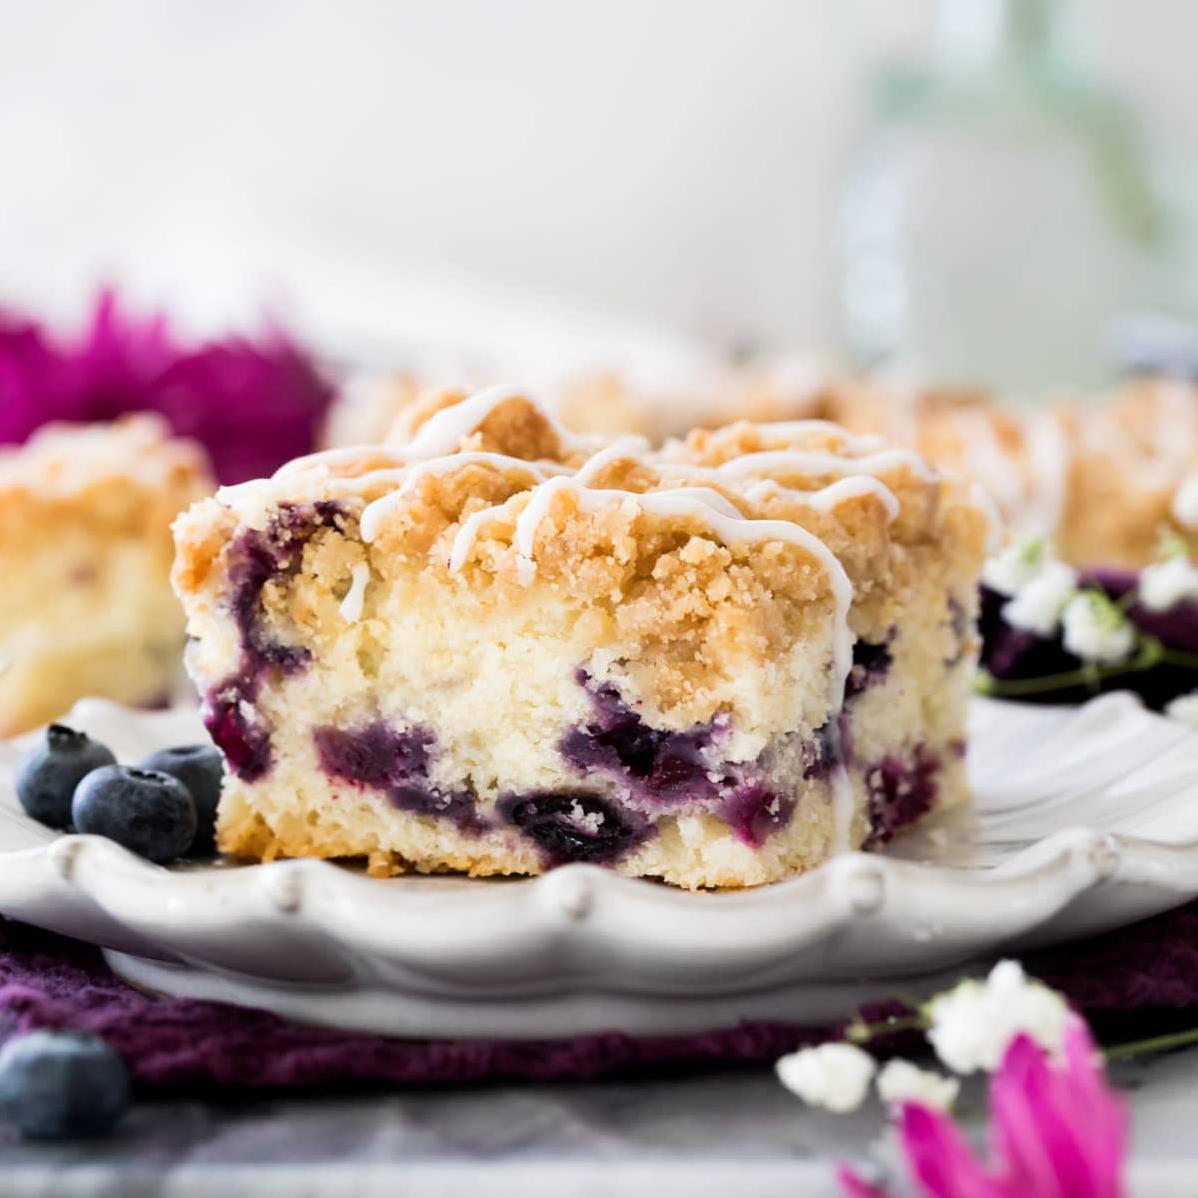  Let your taste buds dance with every bite of this blueberry coffee cake! 🎉